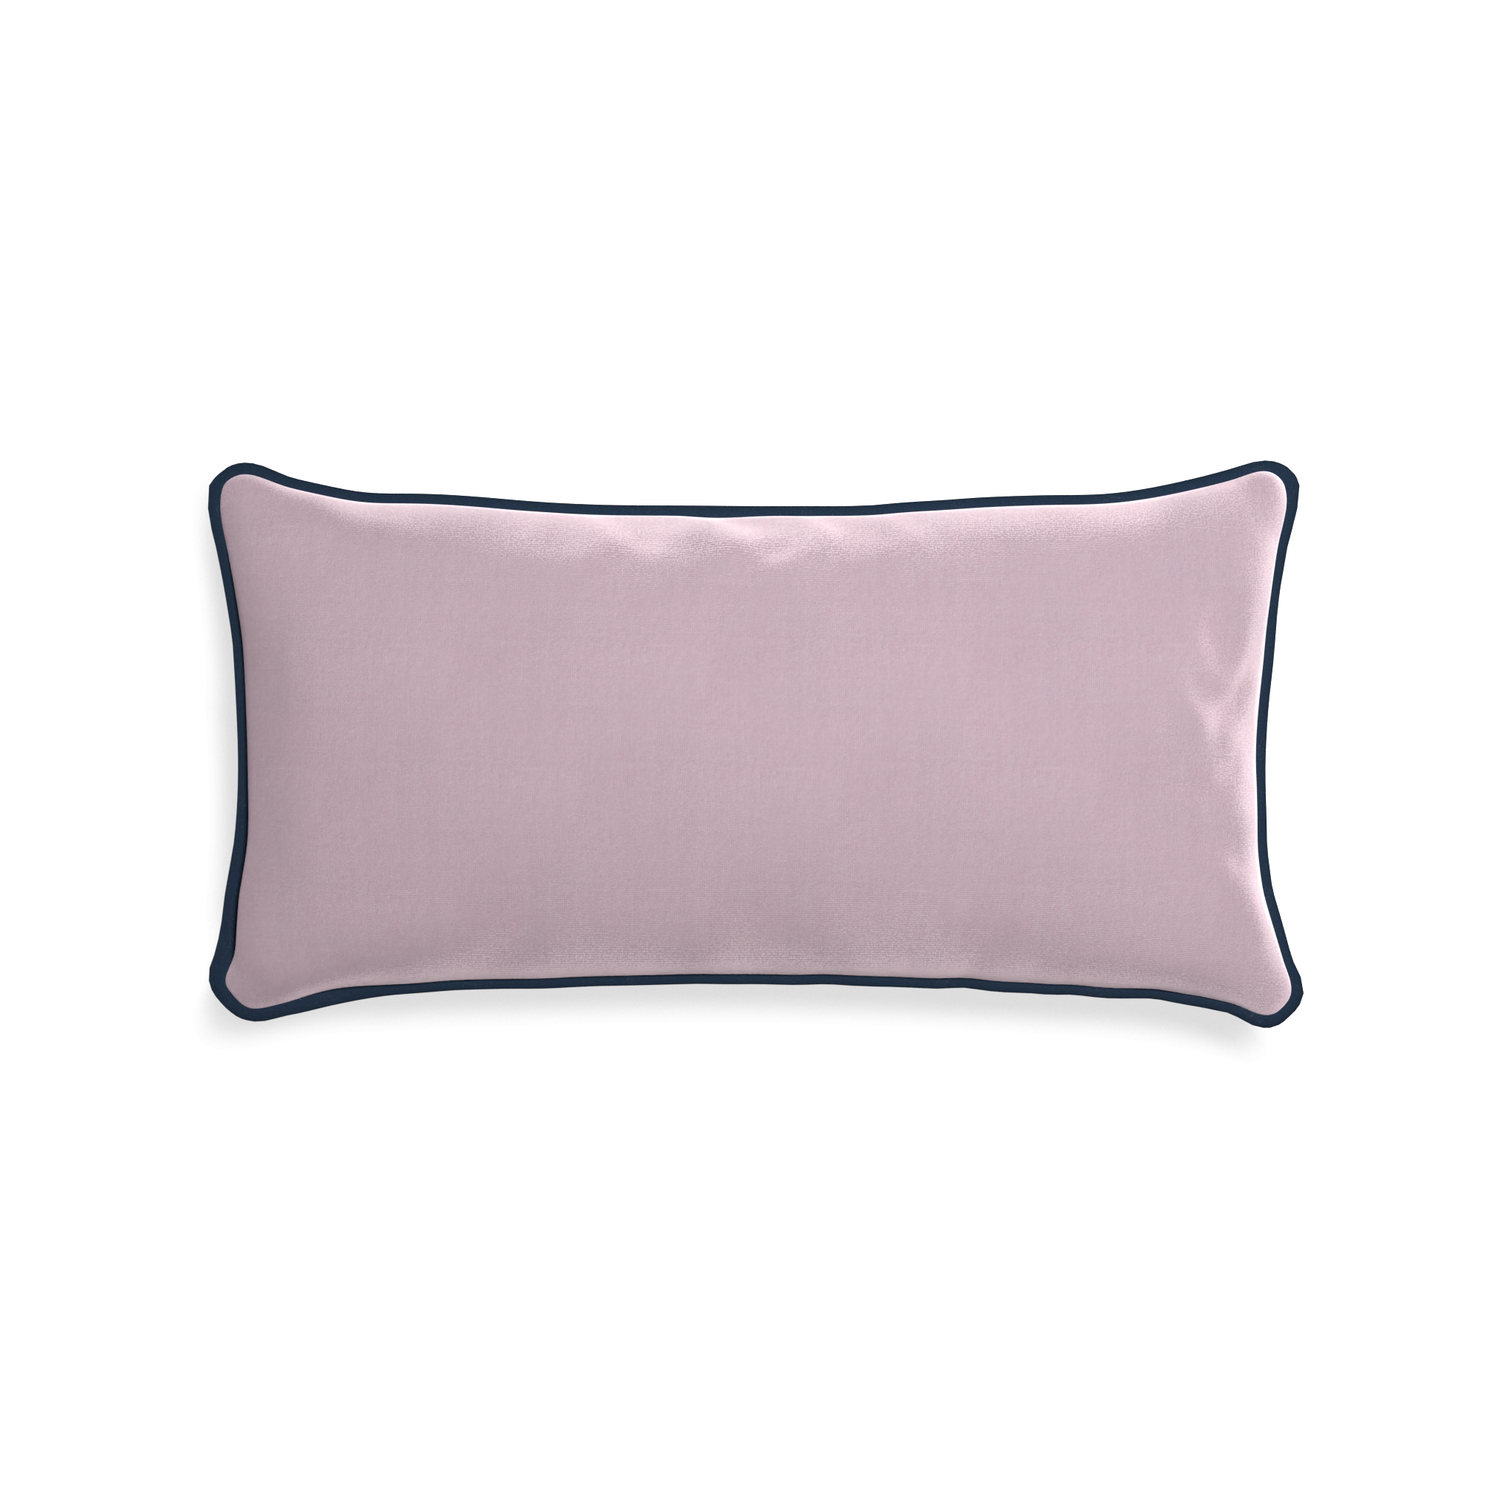 Midi-lumbar lilac velvet custom lilacpillow with c piping on white background